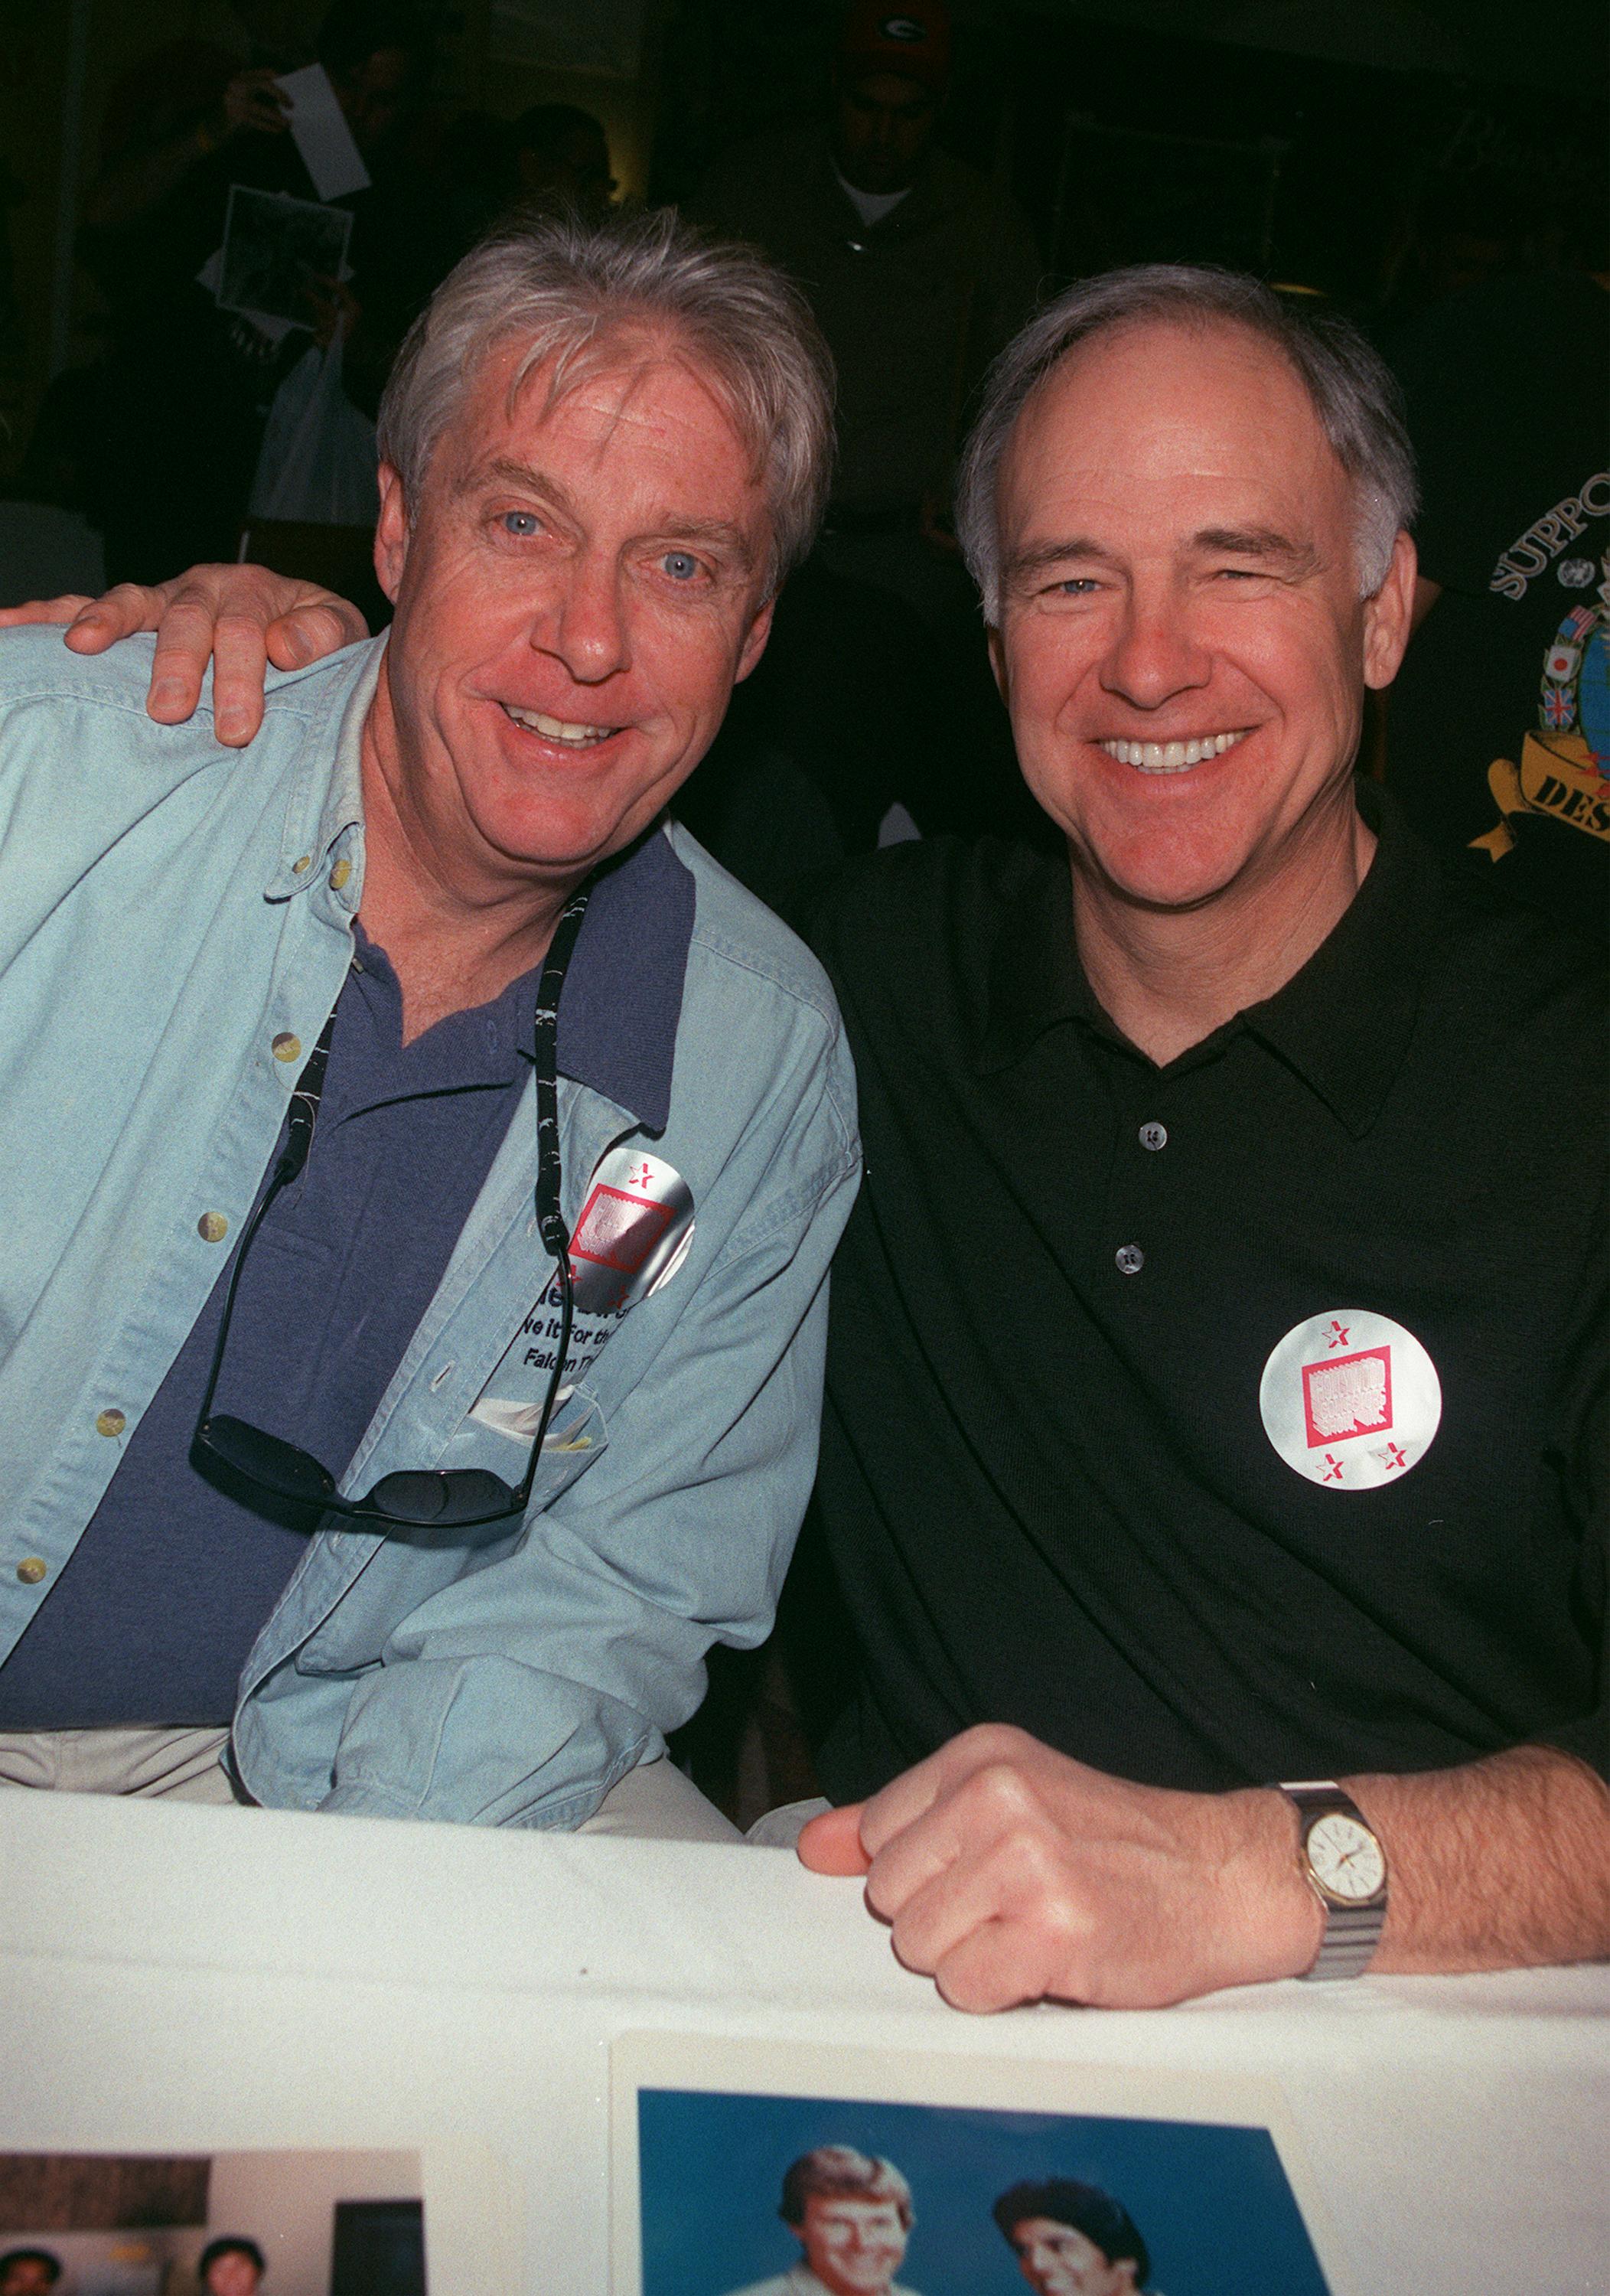 Paul Linke and Robert Pine at the Hollywood Collectors and Celebrity Show on January 20, 2001, in North Hollywood, California | Source: Getty Images